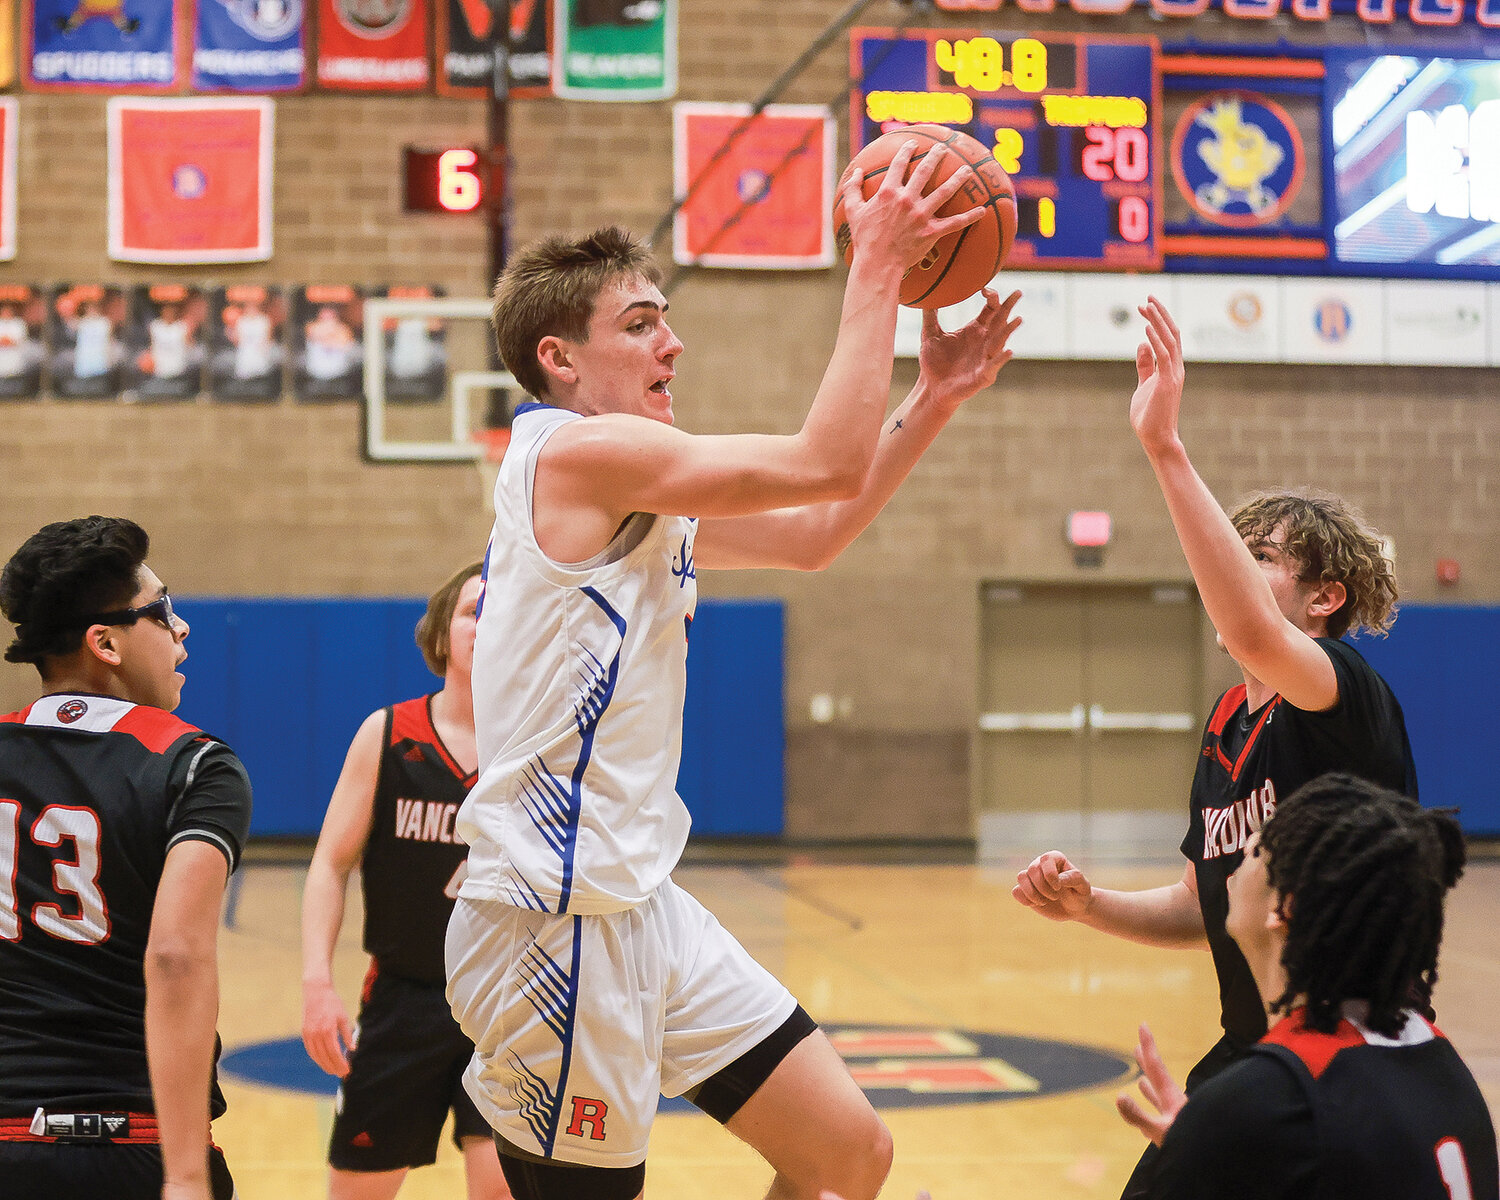 Spudder guard Jamison McCann passes out of the lane to the perimeter during Ridgefield’s 56-39 win over the Fort Vancouver Trappers on Wednesday, Jan. 9.